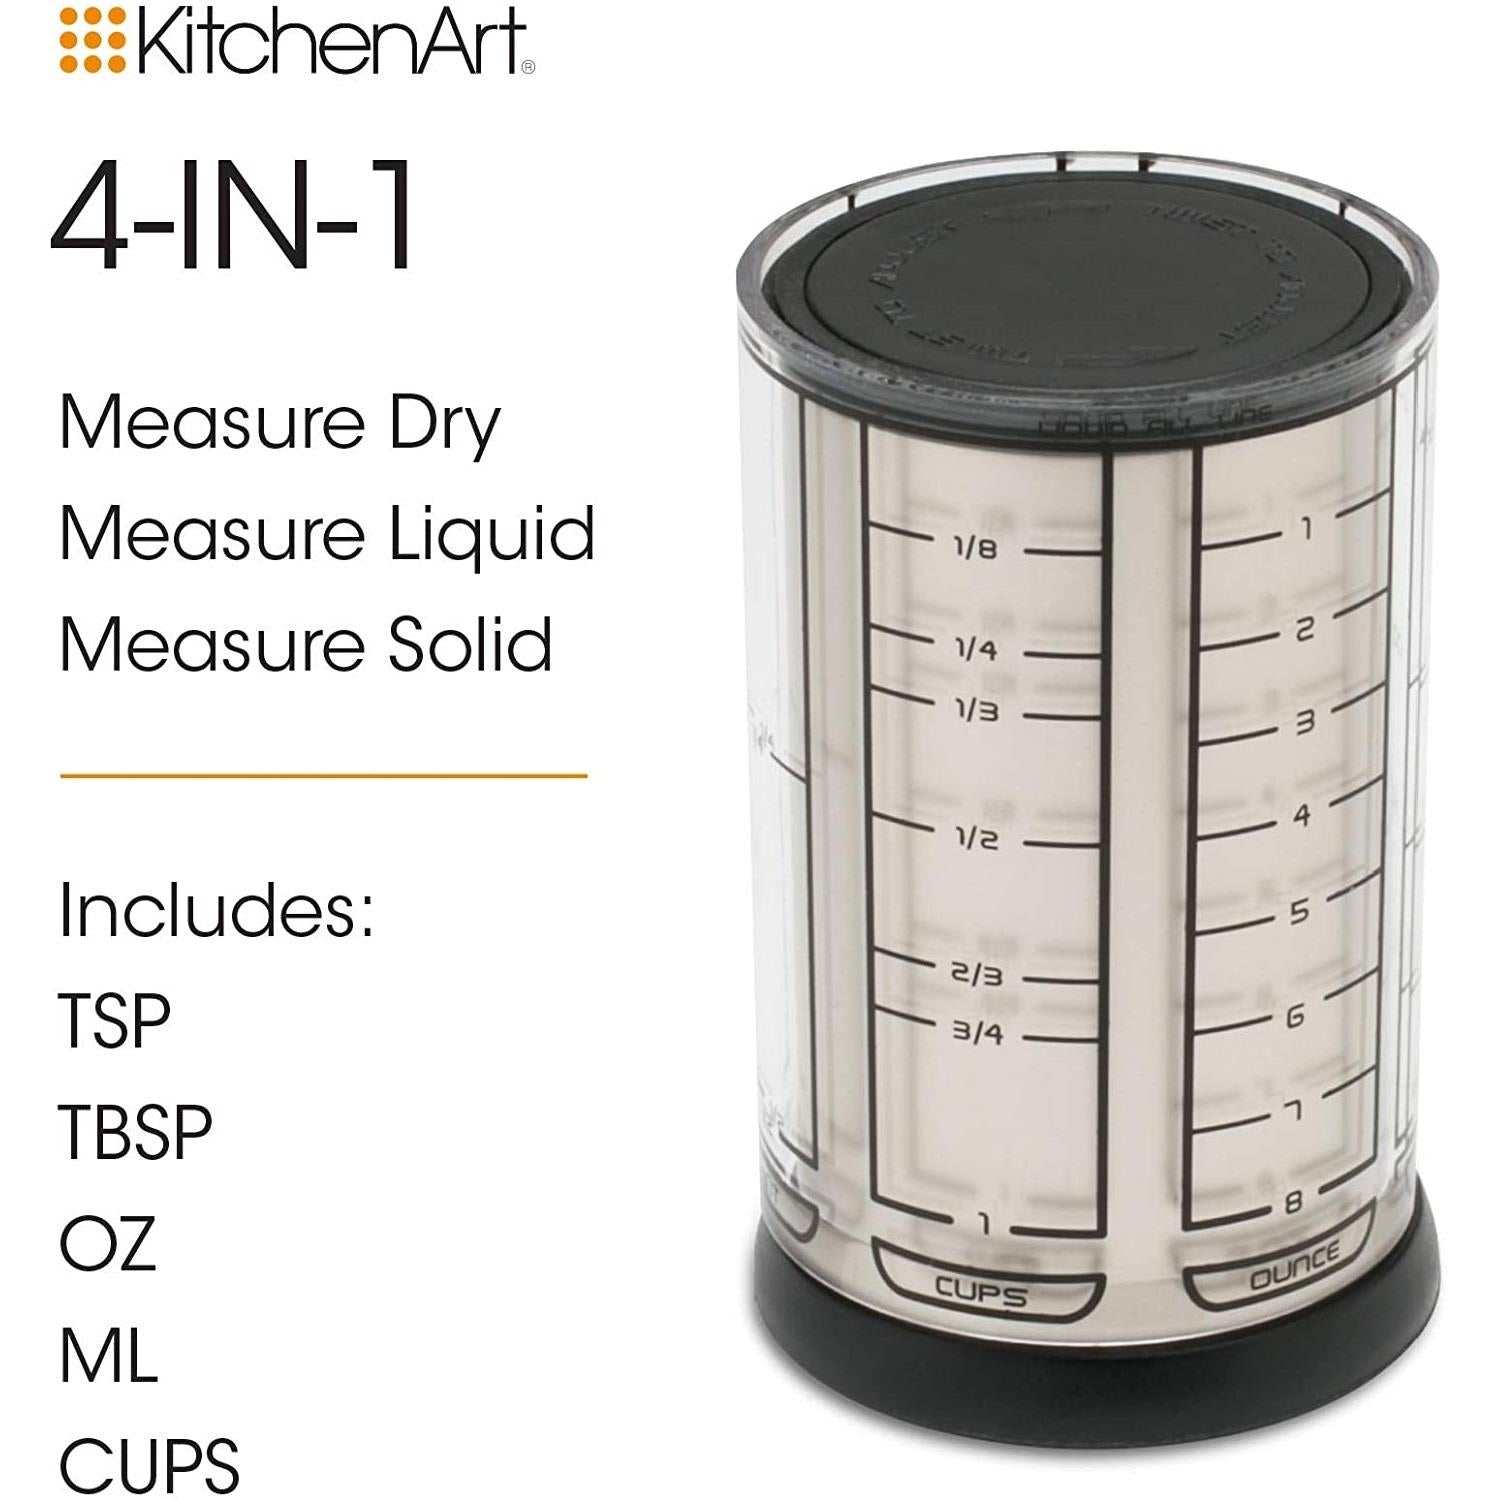 KitchenArt 2 Cup Adjust-A-Cup Measuring Cup